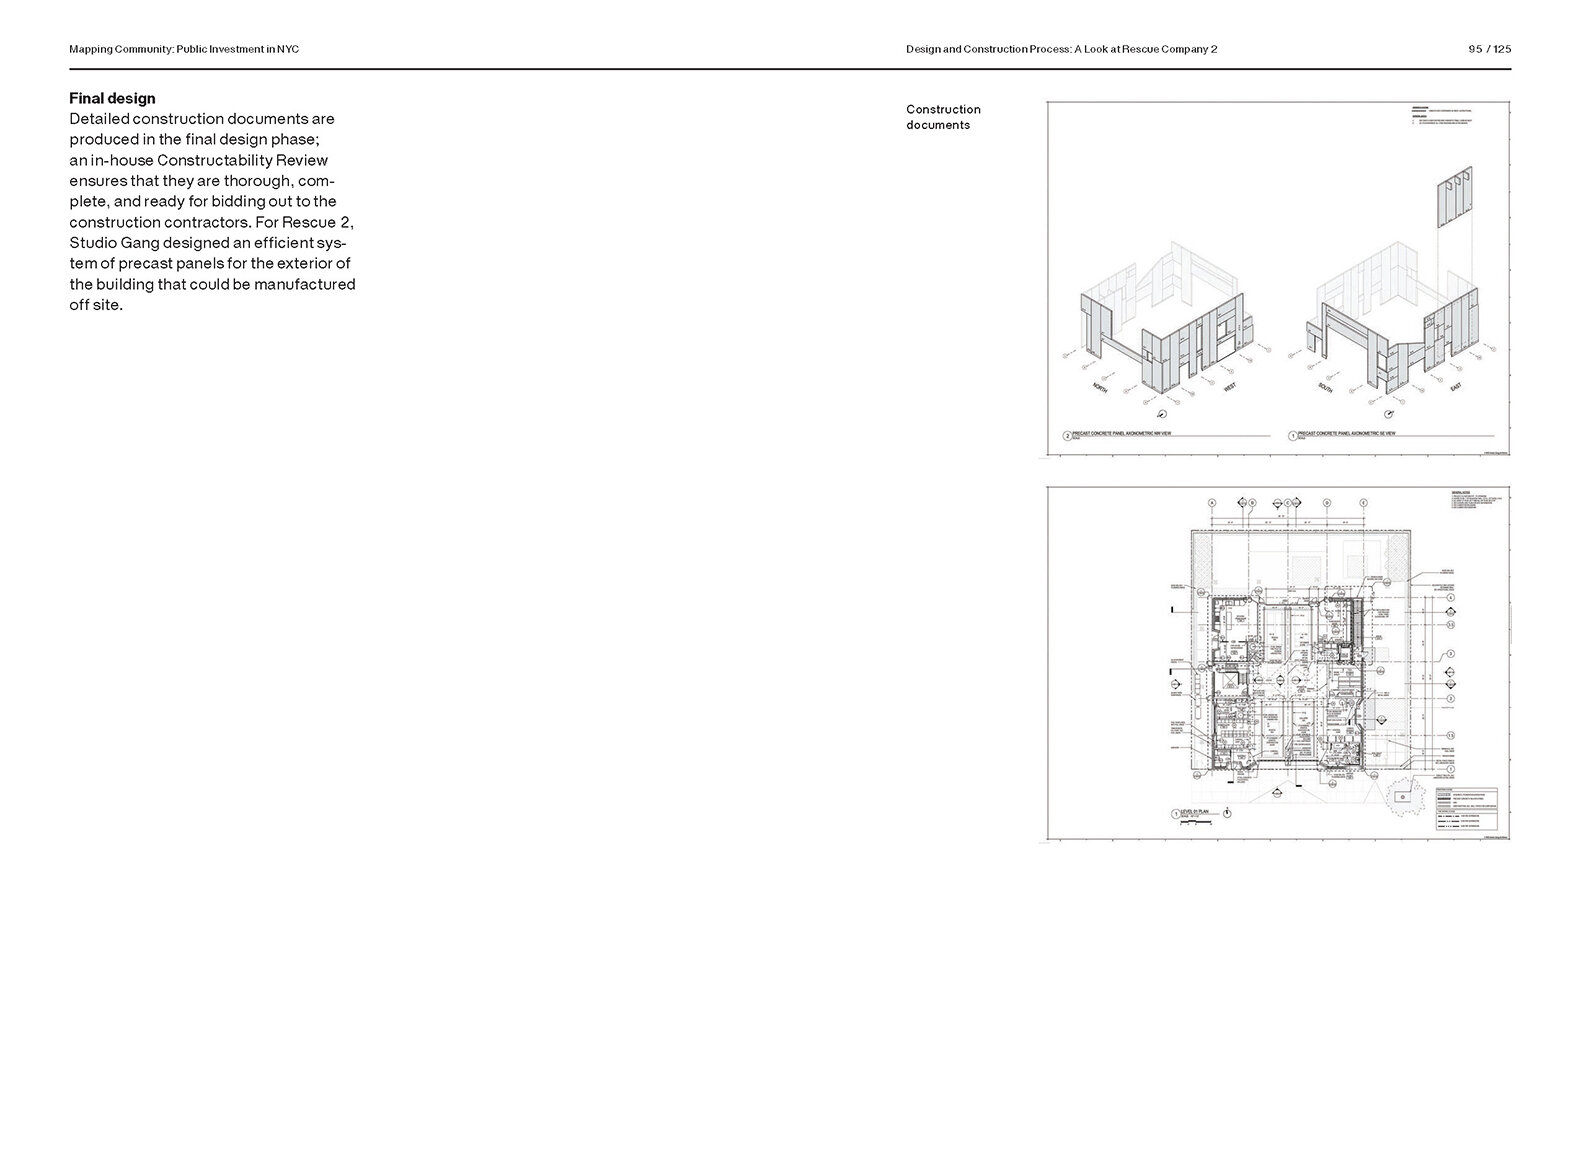 MAPPING COMMUNITY EXHIBT CATALOG_Page_48.jpg